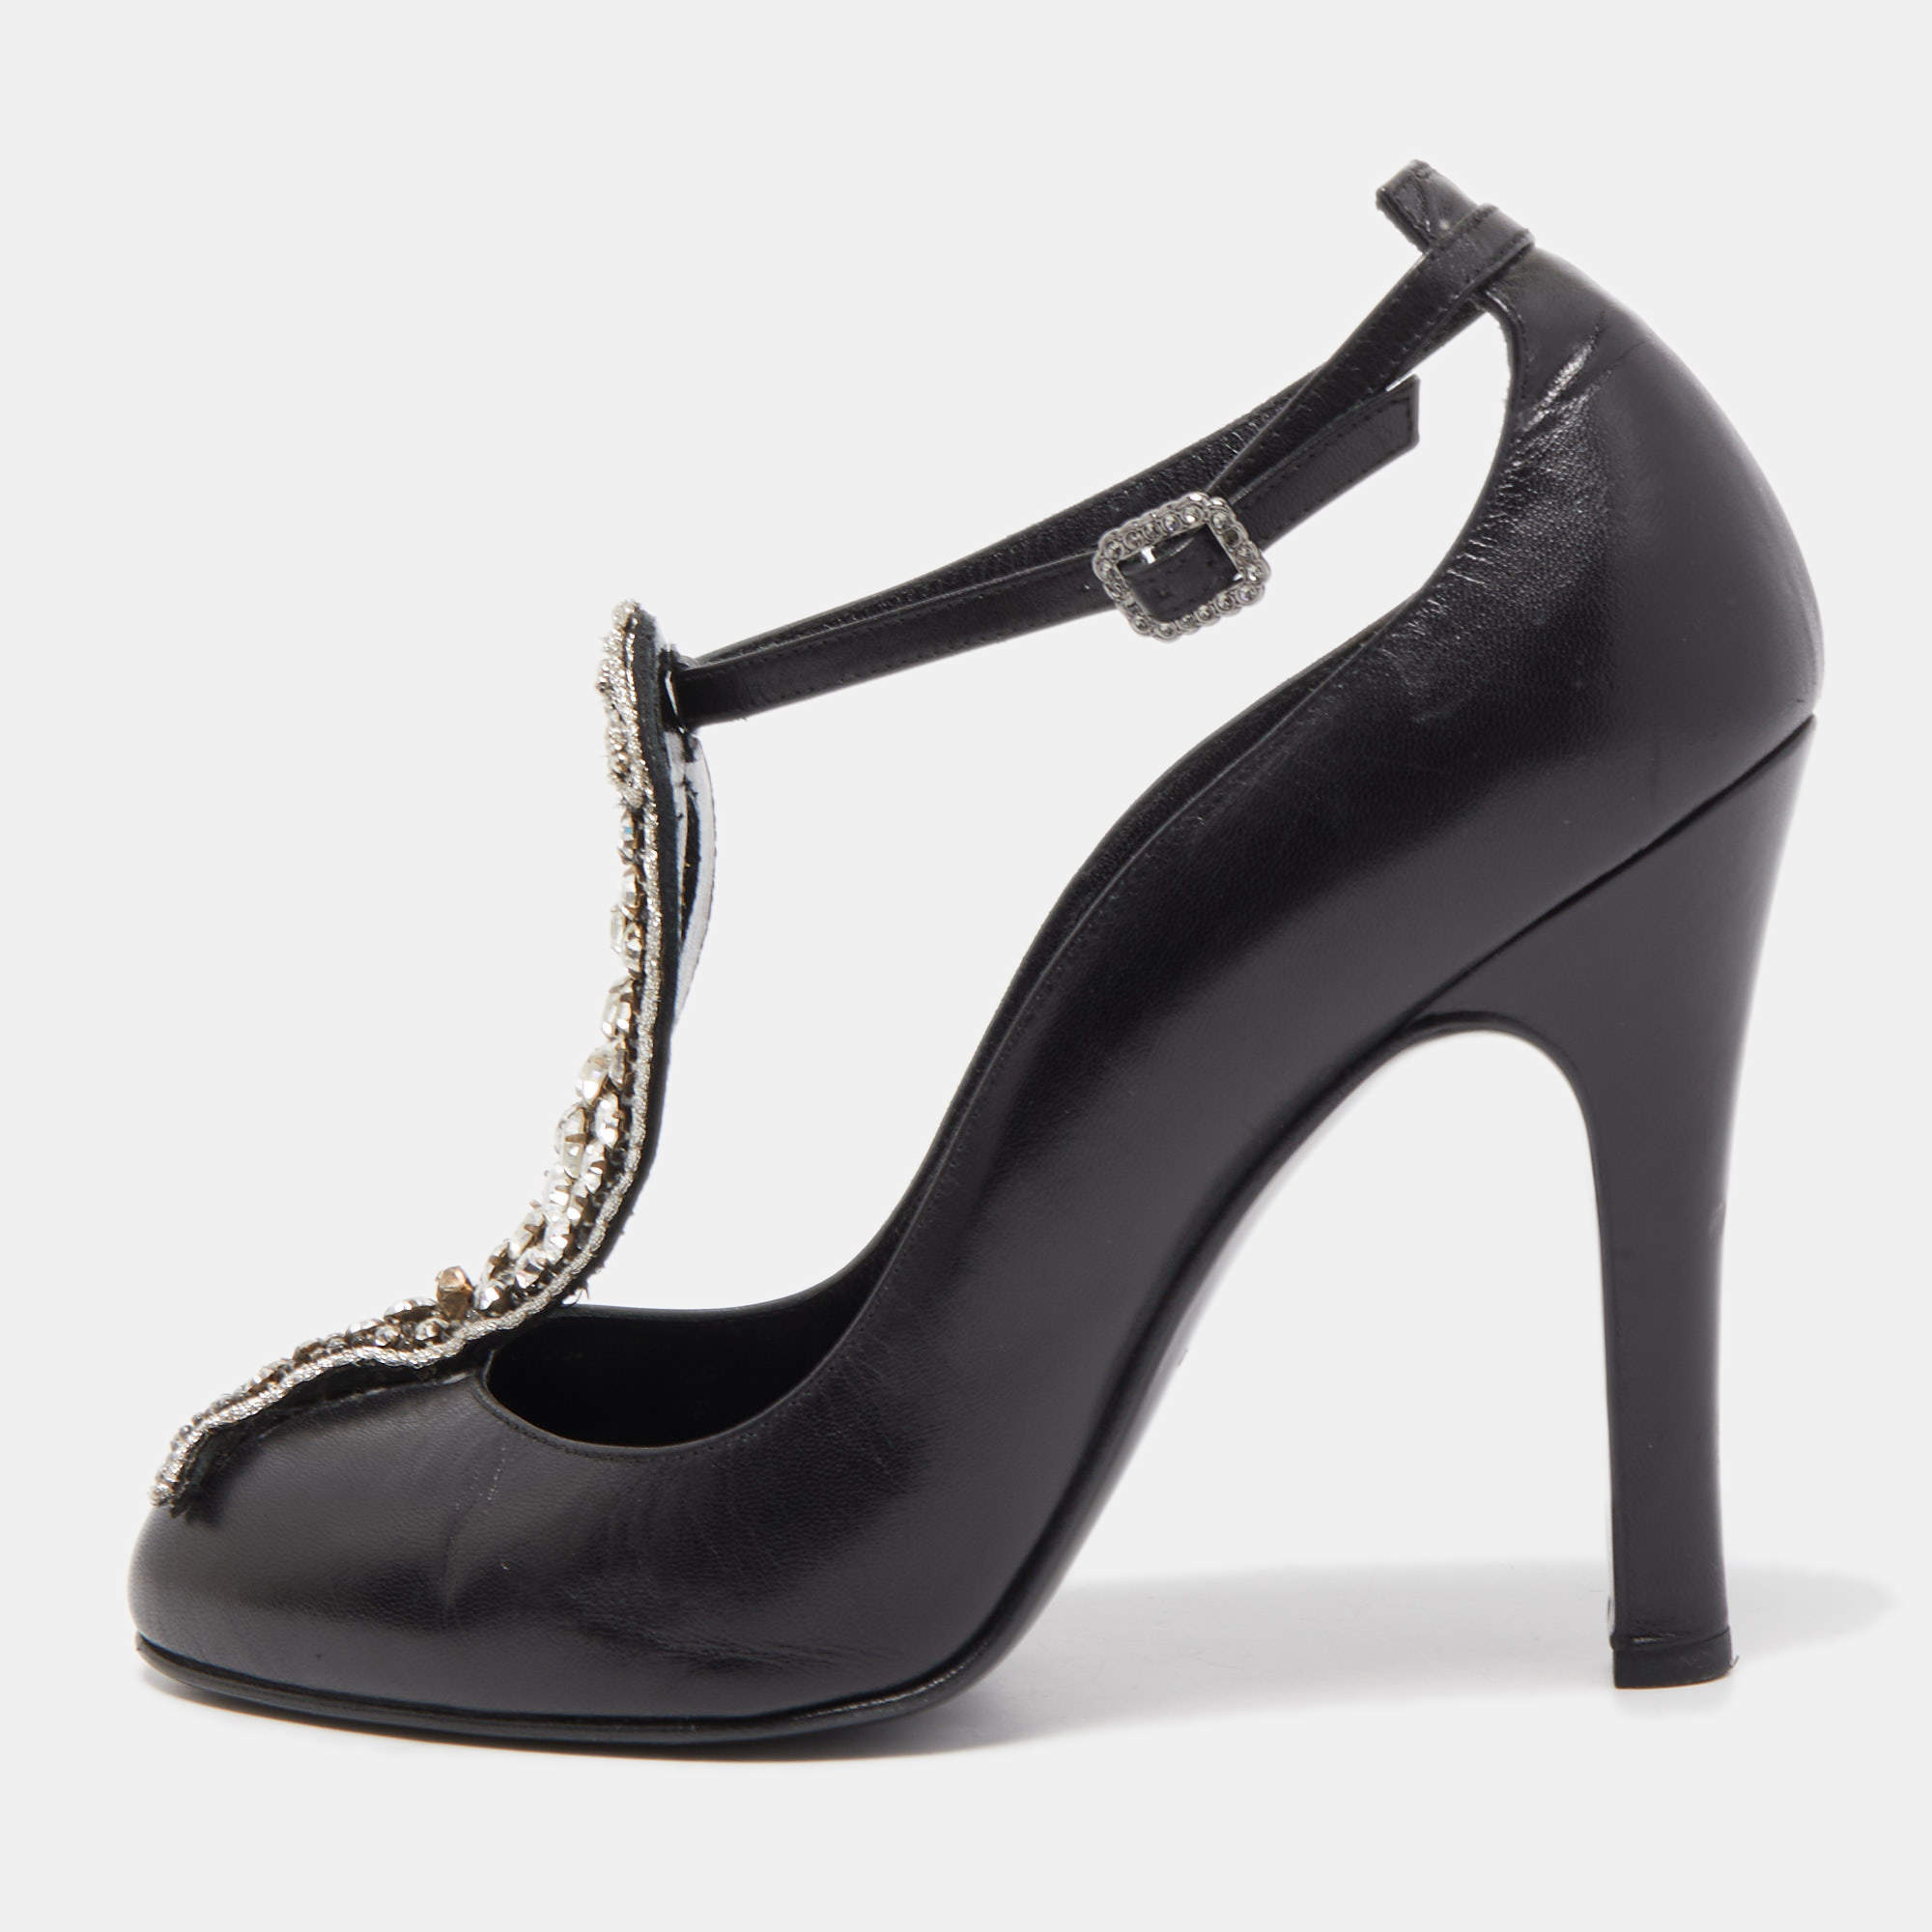 Chanel Black Leather Crystal Embellished T-Strap Pumps Size 38 price in  Saudi Arabia